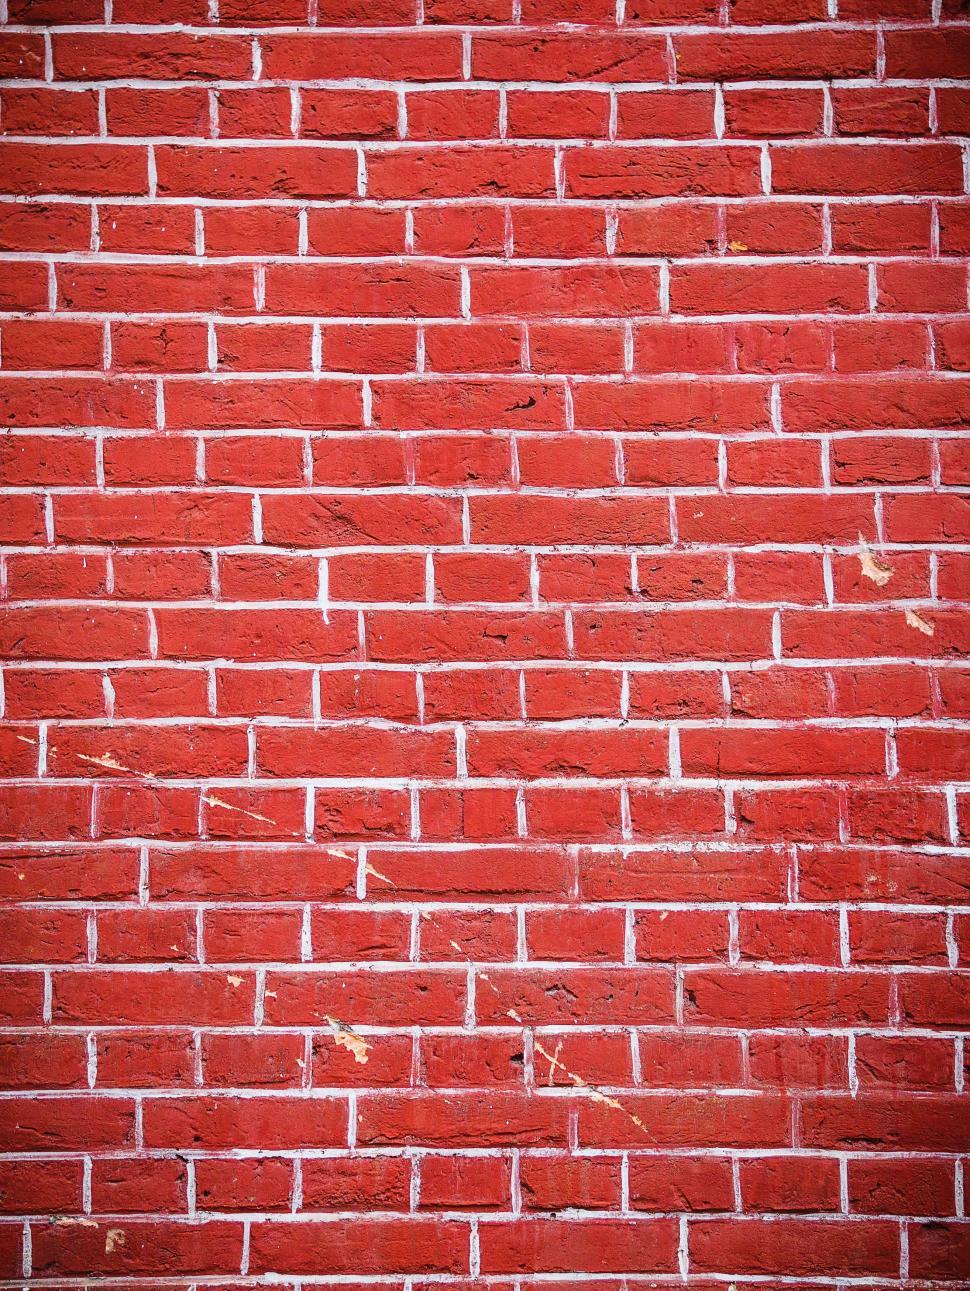 Free Image of Red Brick Wall With White Border 